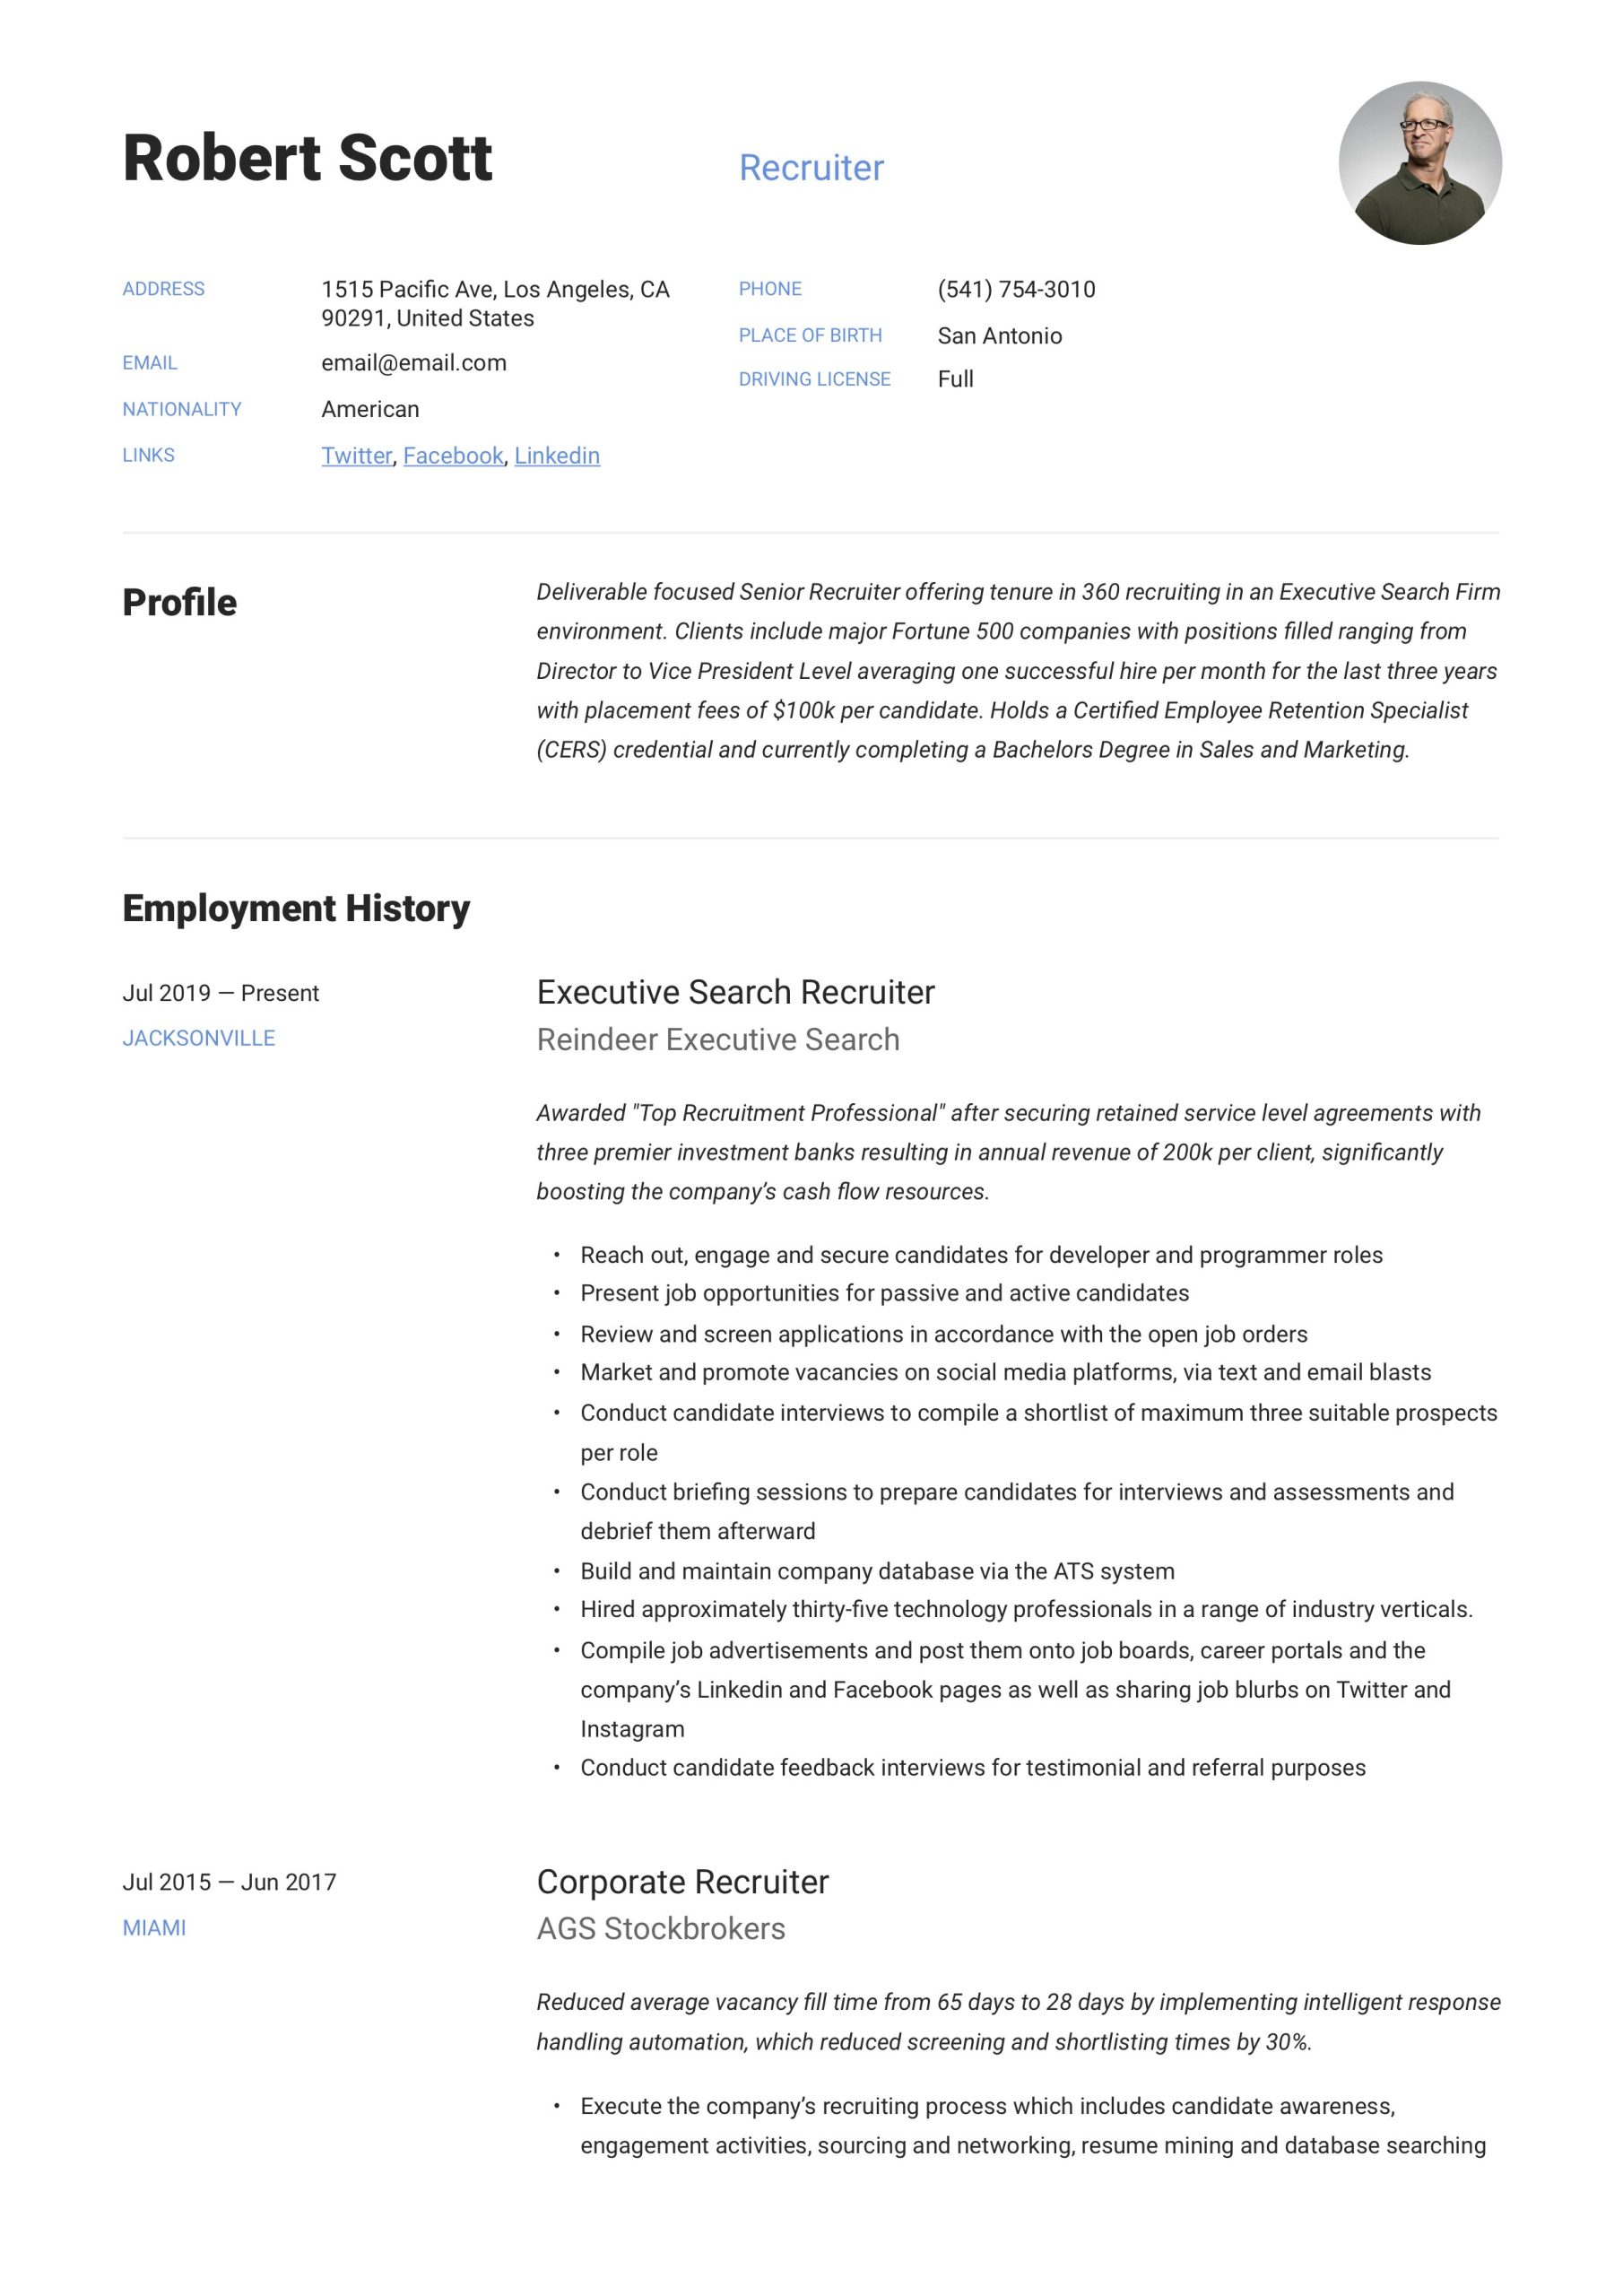 Sample Recruiting Manager Resume In Usa Recruiter Resume & Writing Guide   12 Pdf Examples 2020